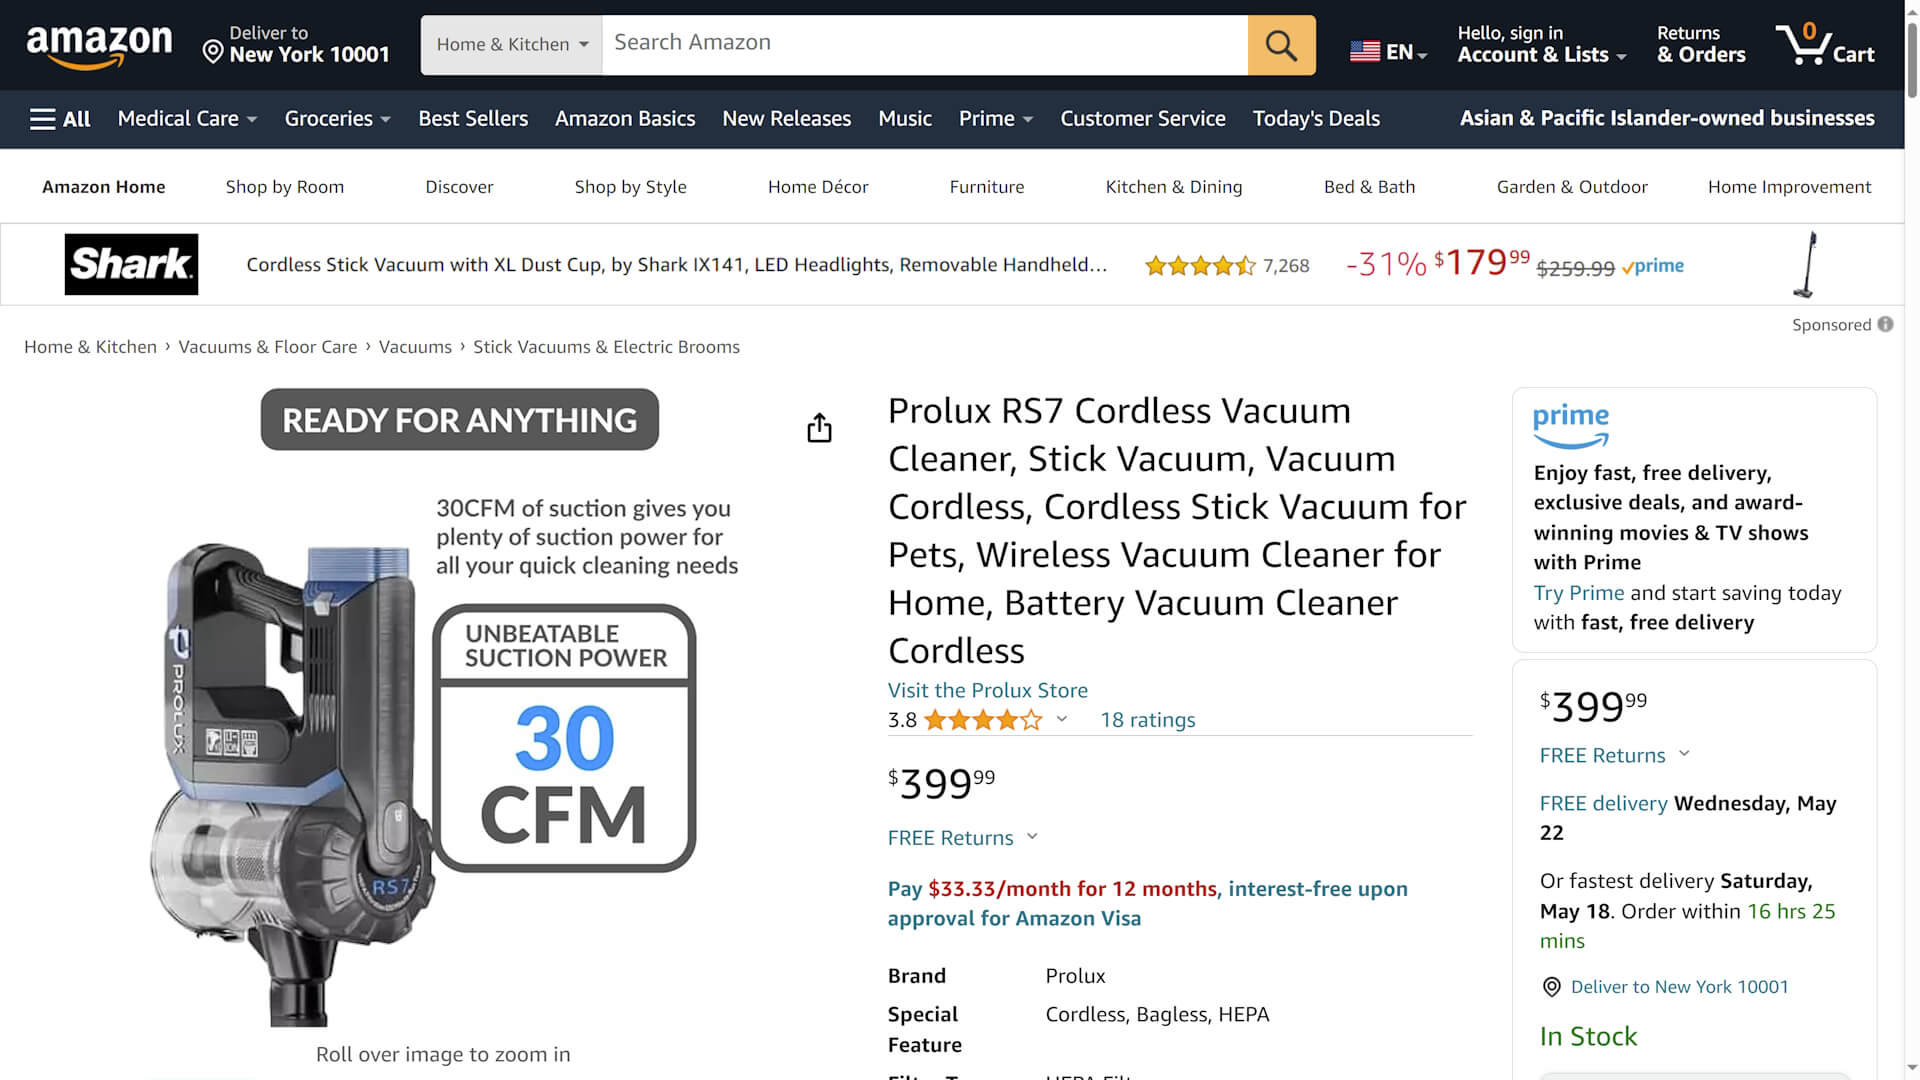 Amazon Product Listing with Vacuum Cleaner 3D Visualization